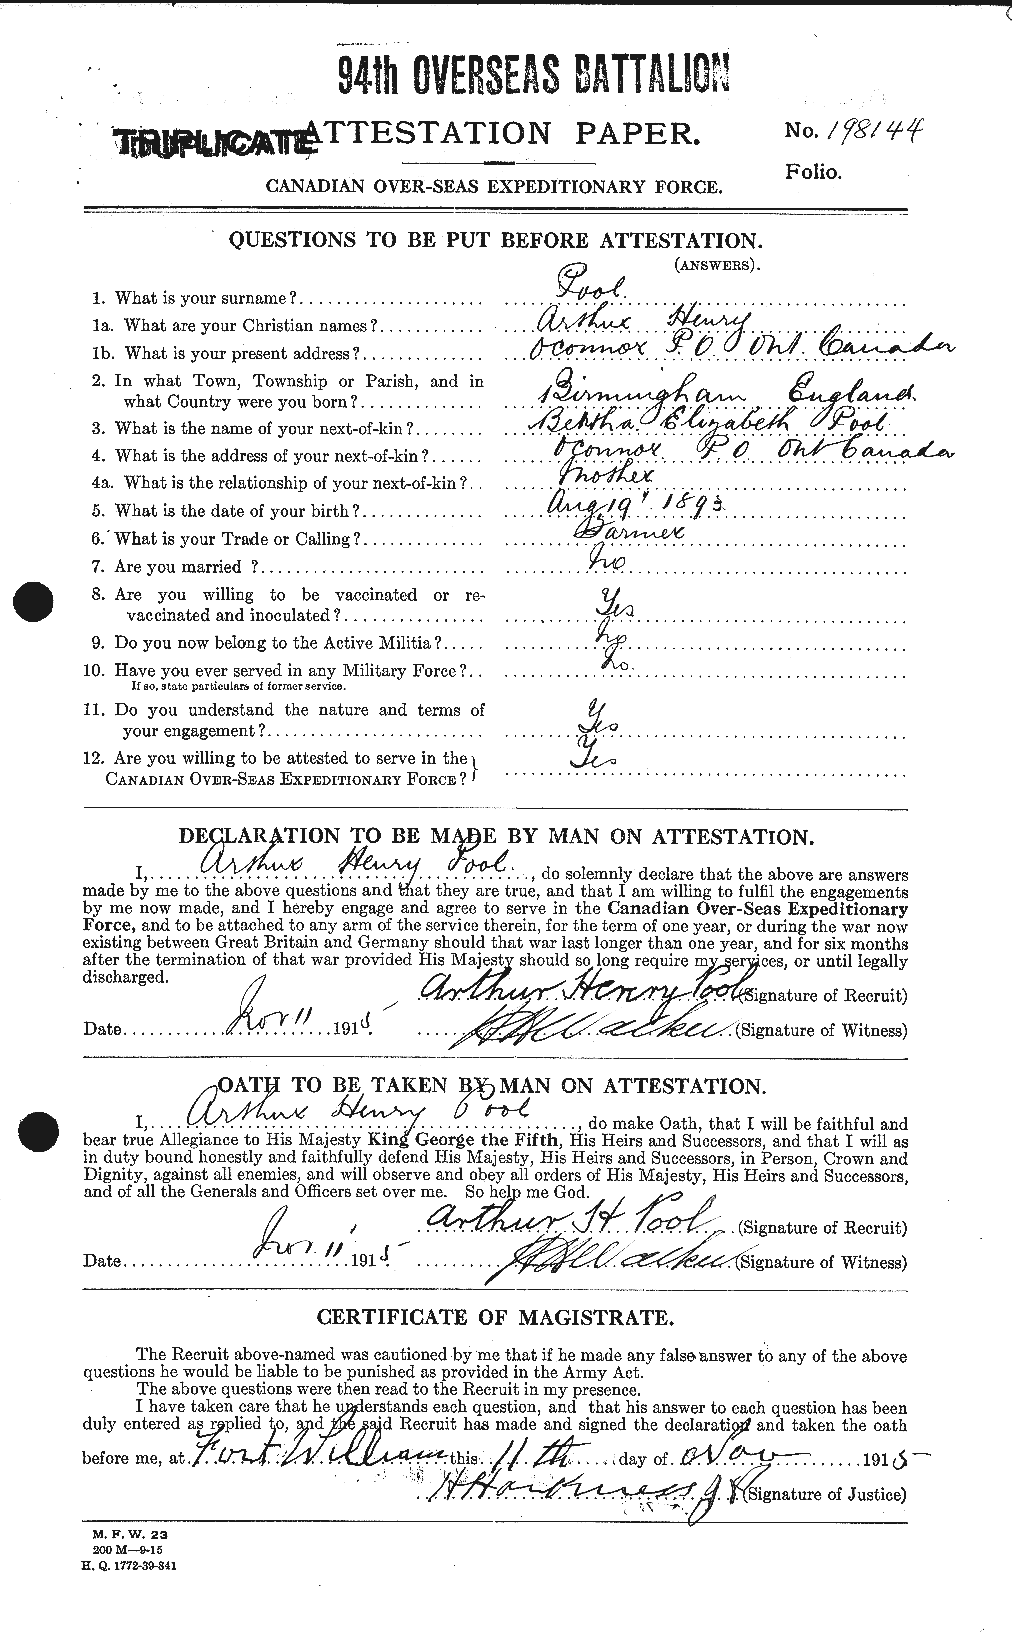 Personnel Records of the First World War - CEF 581206a